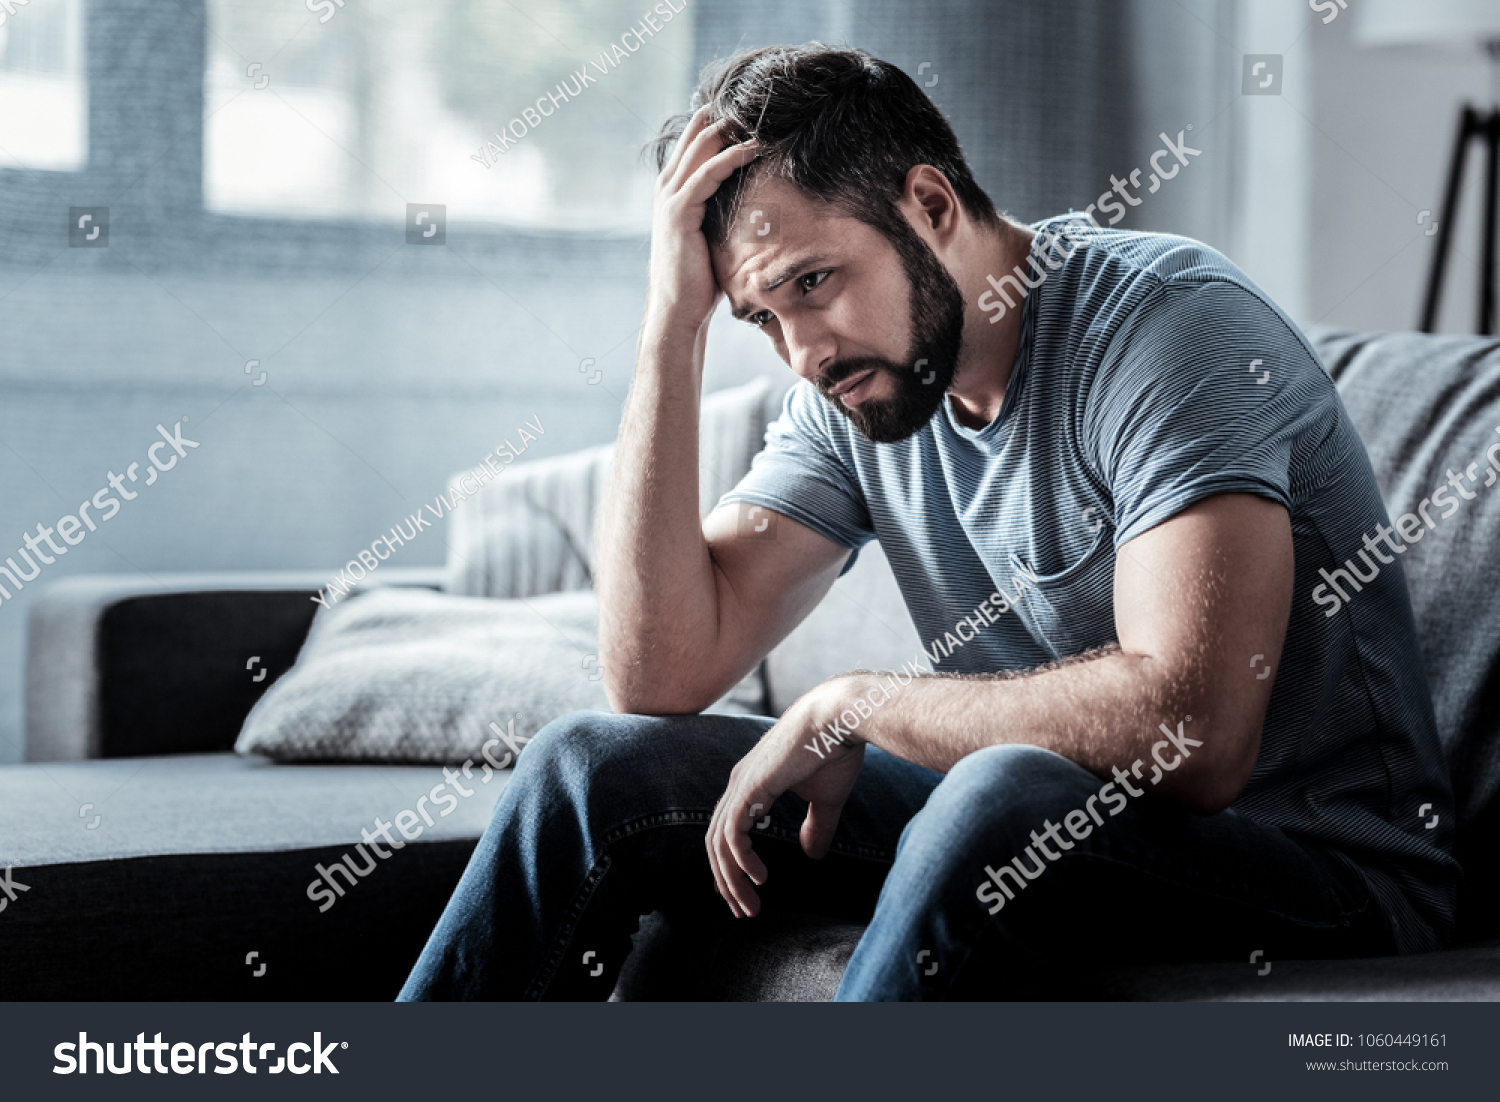 Unpleasant pain. Sad unhappy handsome man sitting on the sofa and holding his forehead while having headache #1060449161